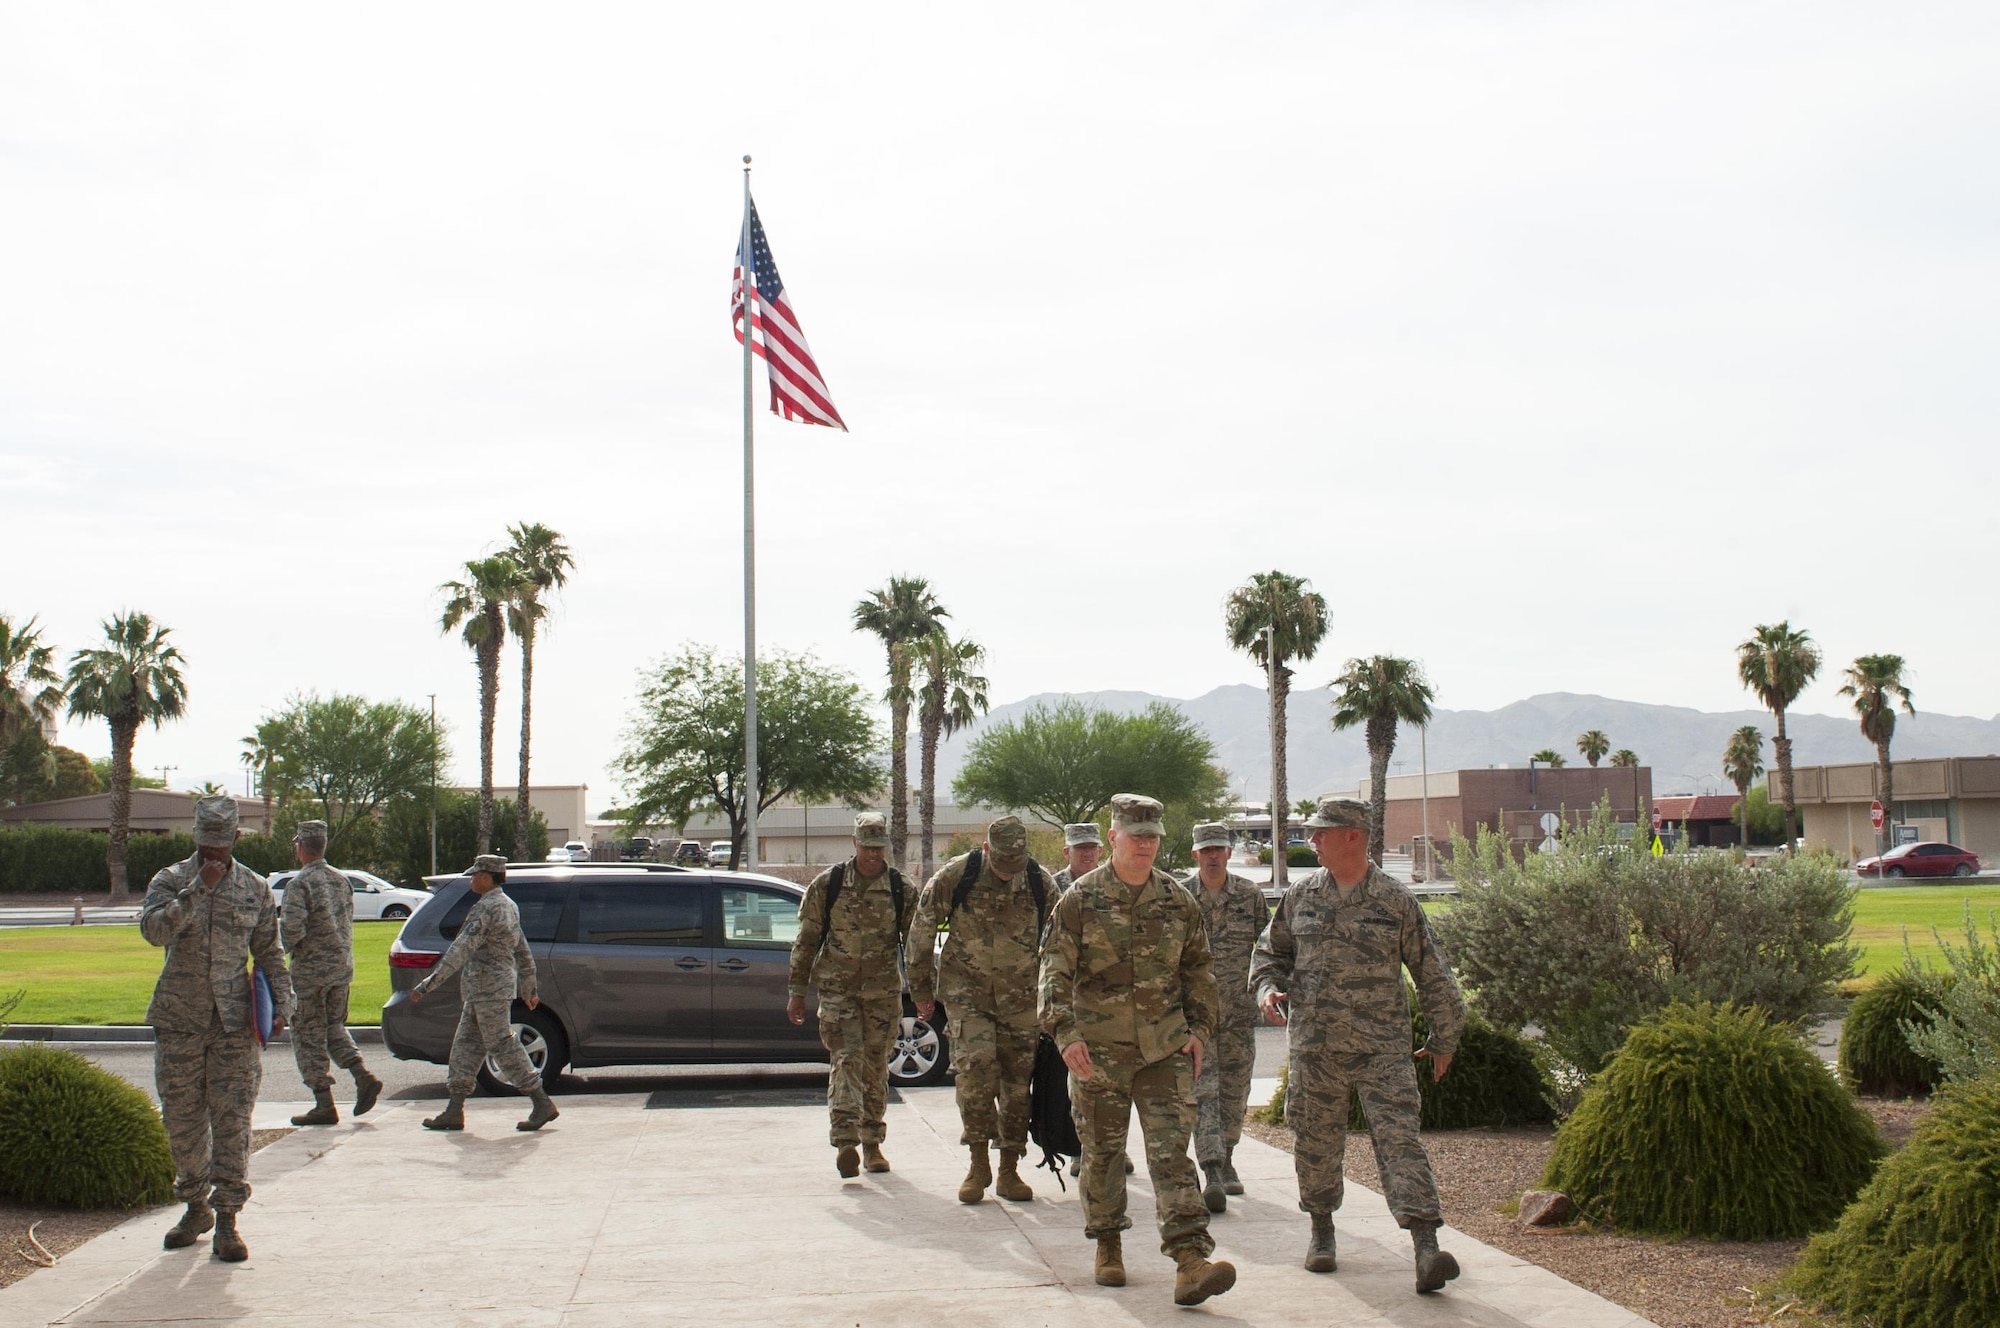 Army Command Sgt. Maj. John Troxell (center), Senior Enlisted Advisor to the Chairman of the Joint Chiefs of Staff, arrives at the U.S. Air Force Warfare Center, Nellis Air Force Base, Nev, July 10, 2017. Throughout the day, Troxell received mission briefs from enlisted teams representing a number of critical Air Force organizations. (U.S. Air Force photo by Senior Airman Joshua Kleinholz)